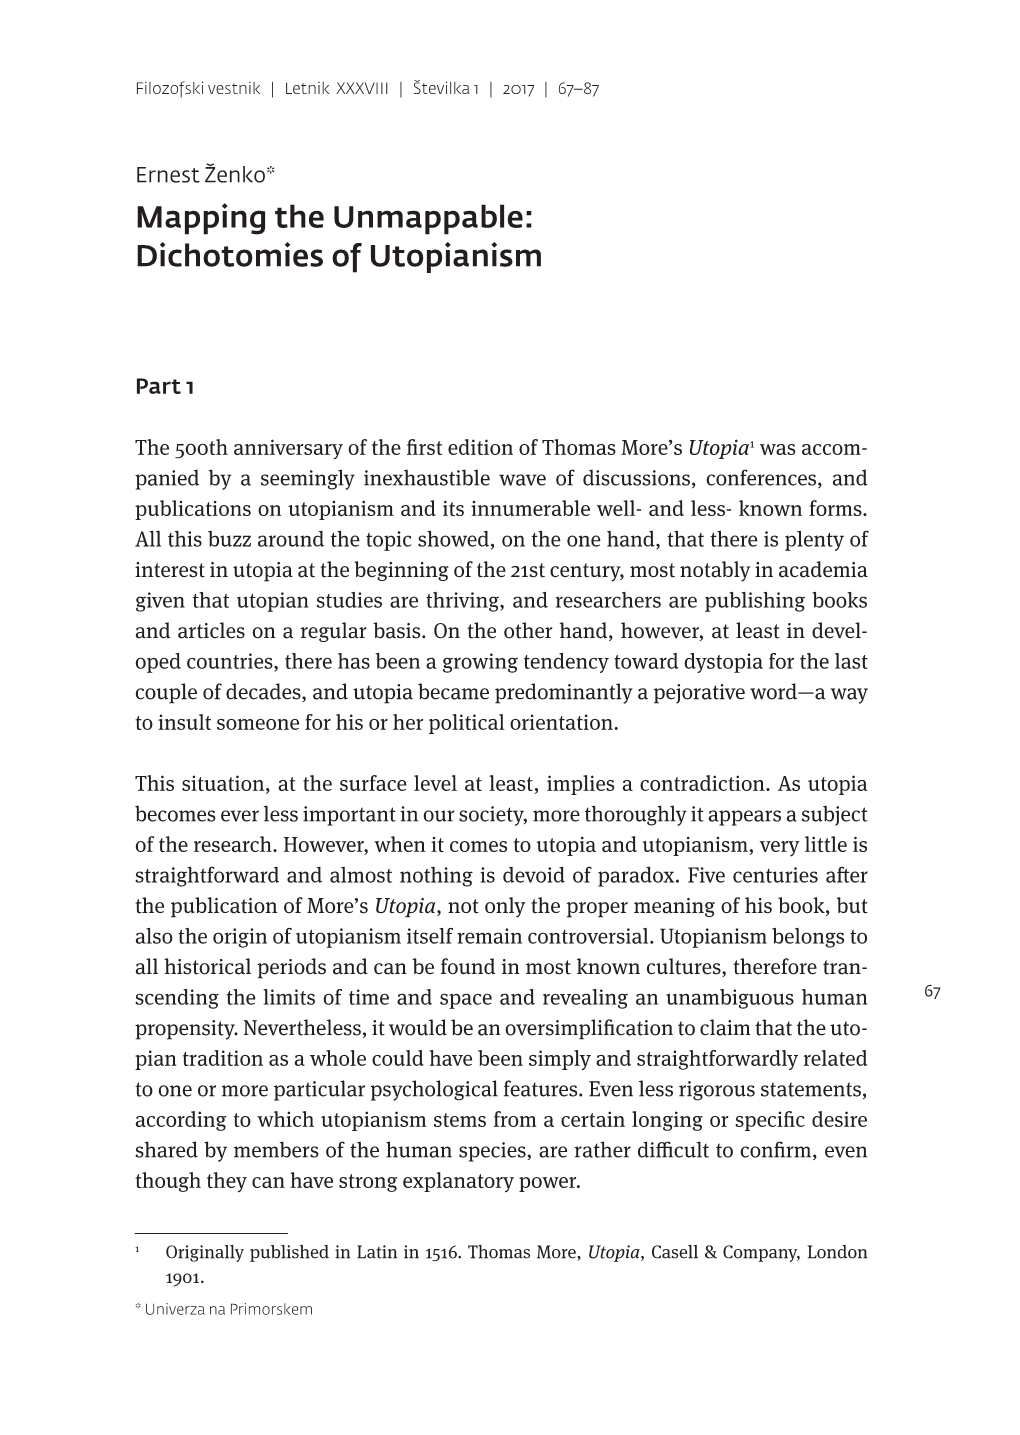 Mapping the Unmappable: Dichotomies of Utopianism